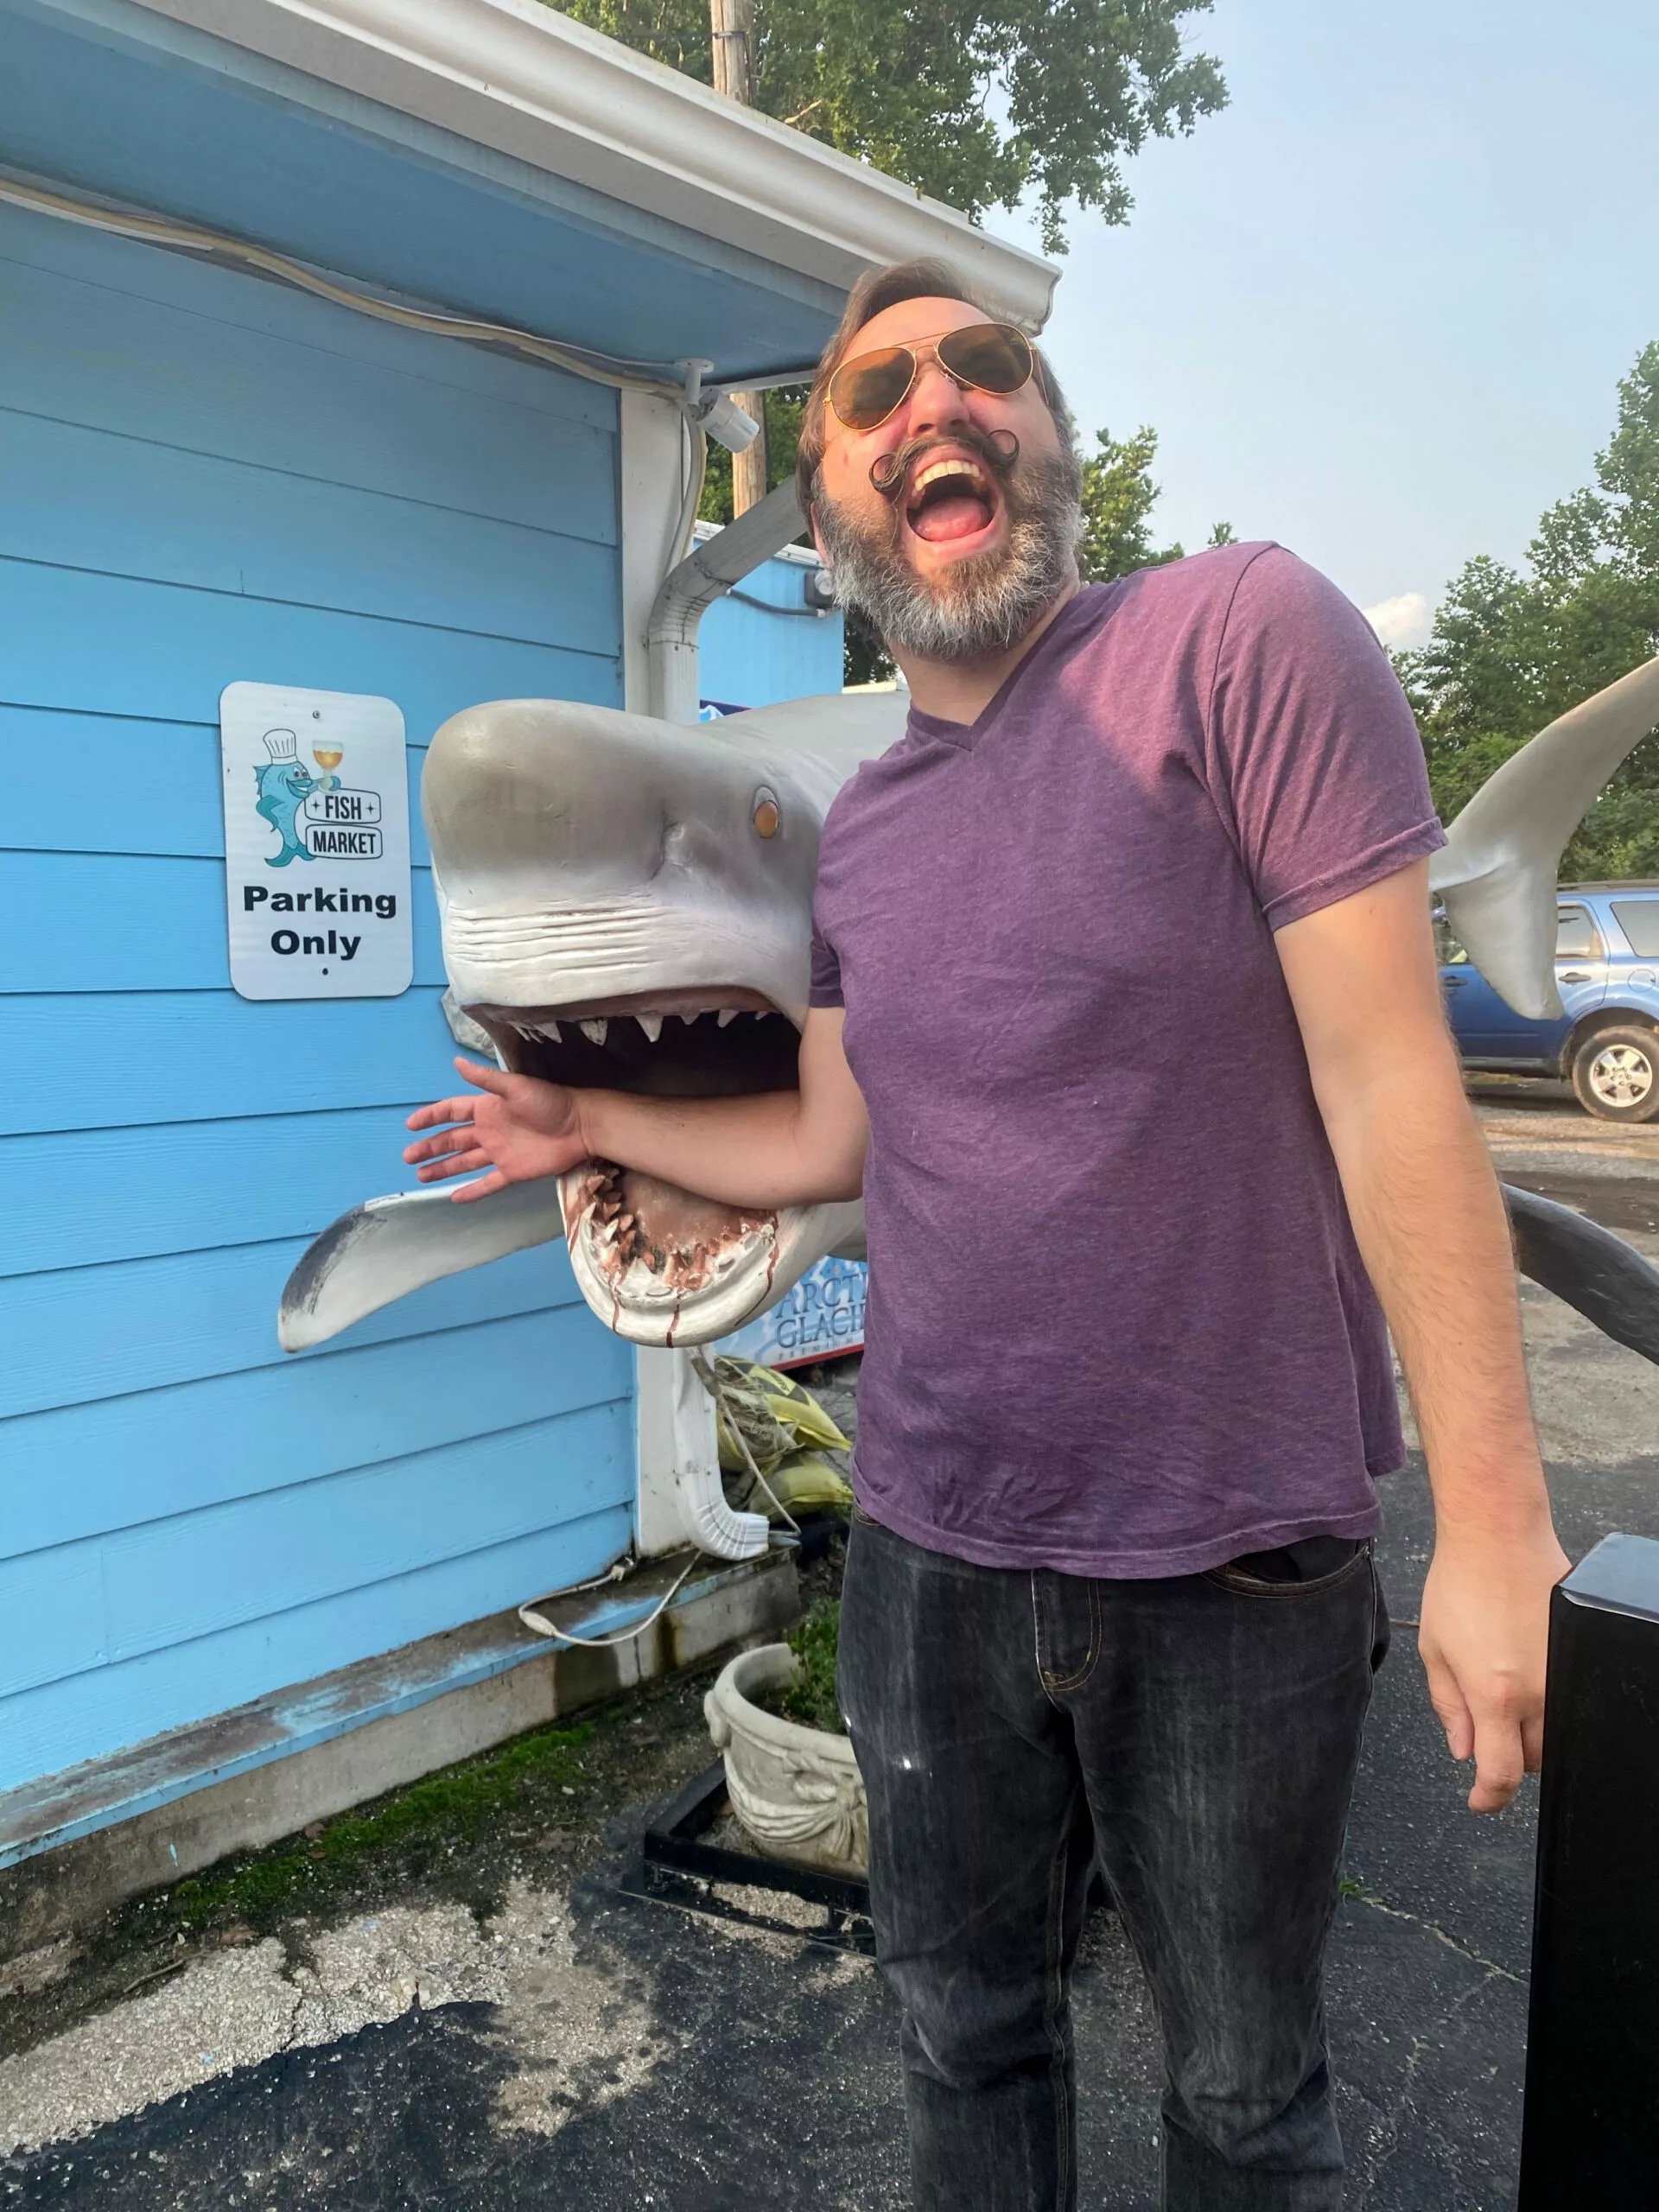 Man with mustache pretending to be bitten by shark statue at The Fish Market in Liberty, Missouri